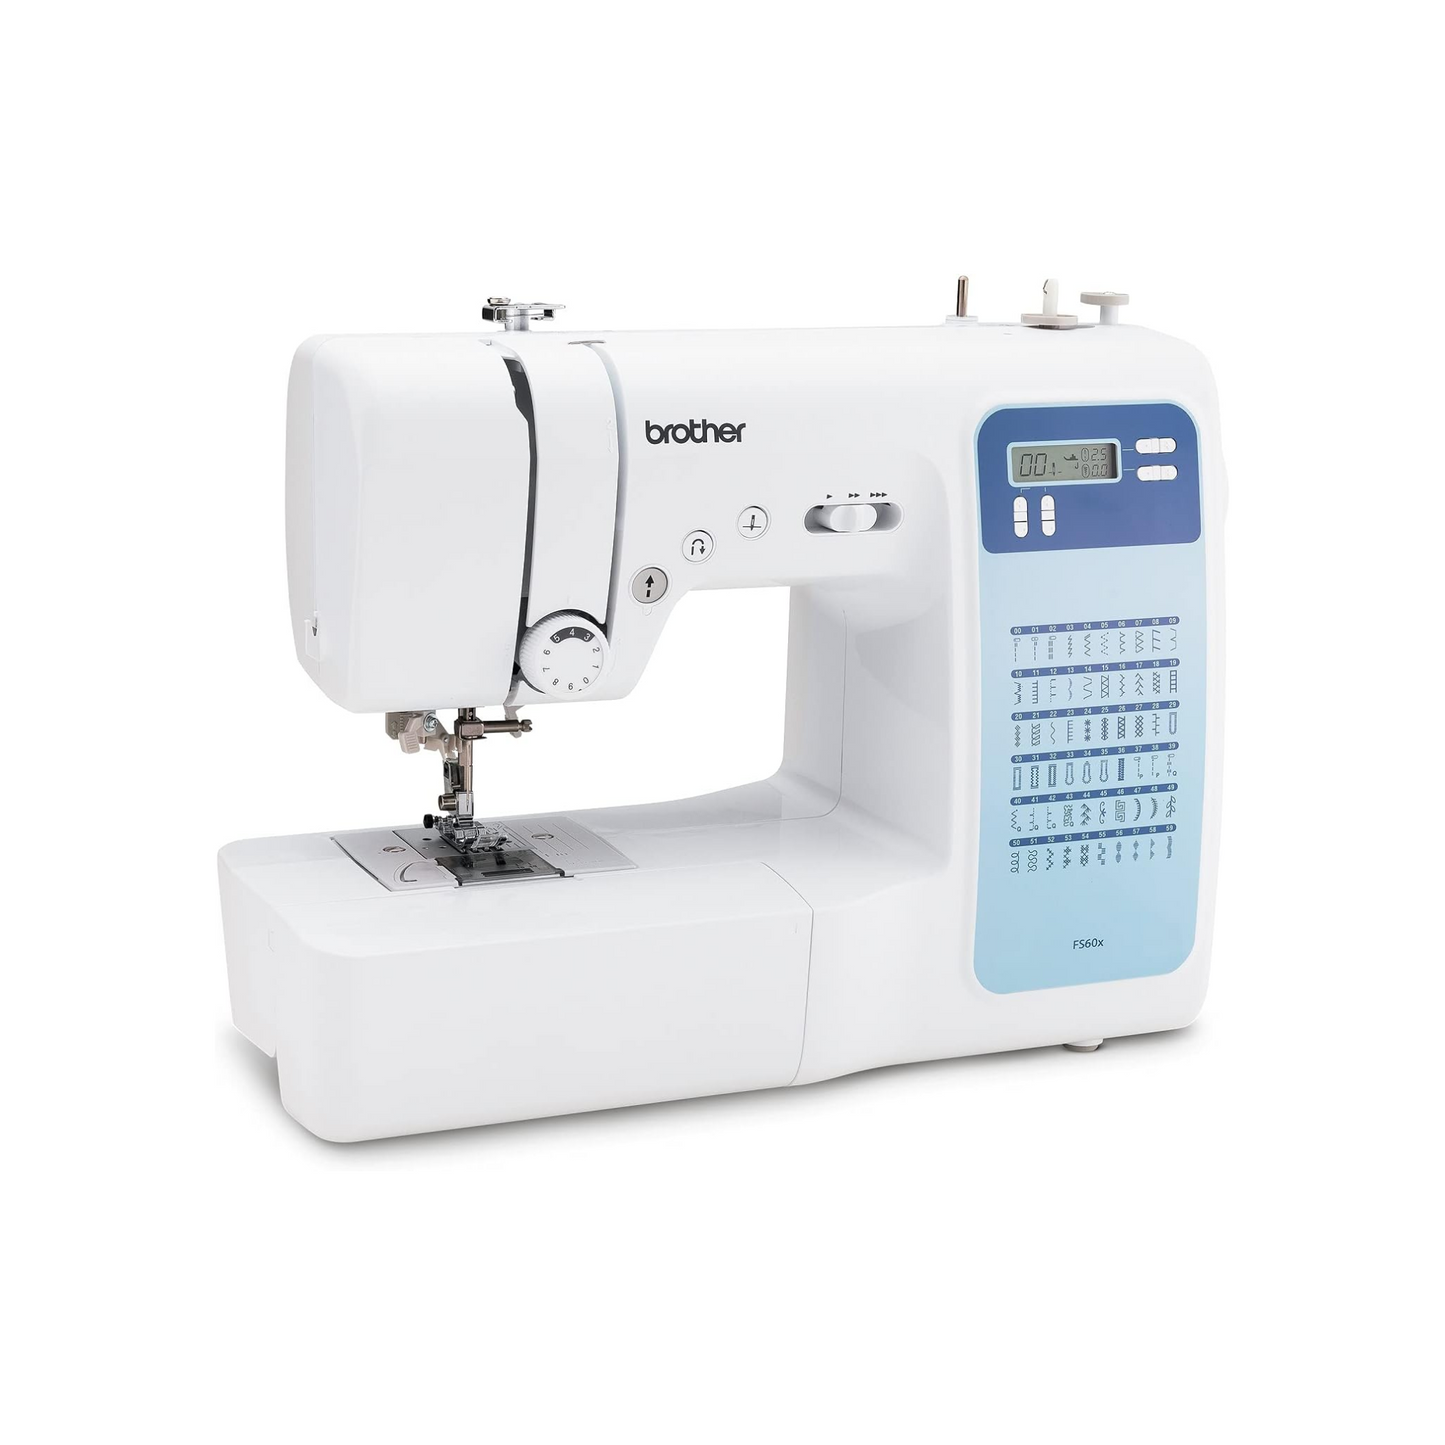 Brother FS60X - Sewing machine - White - Side view